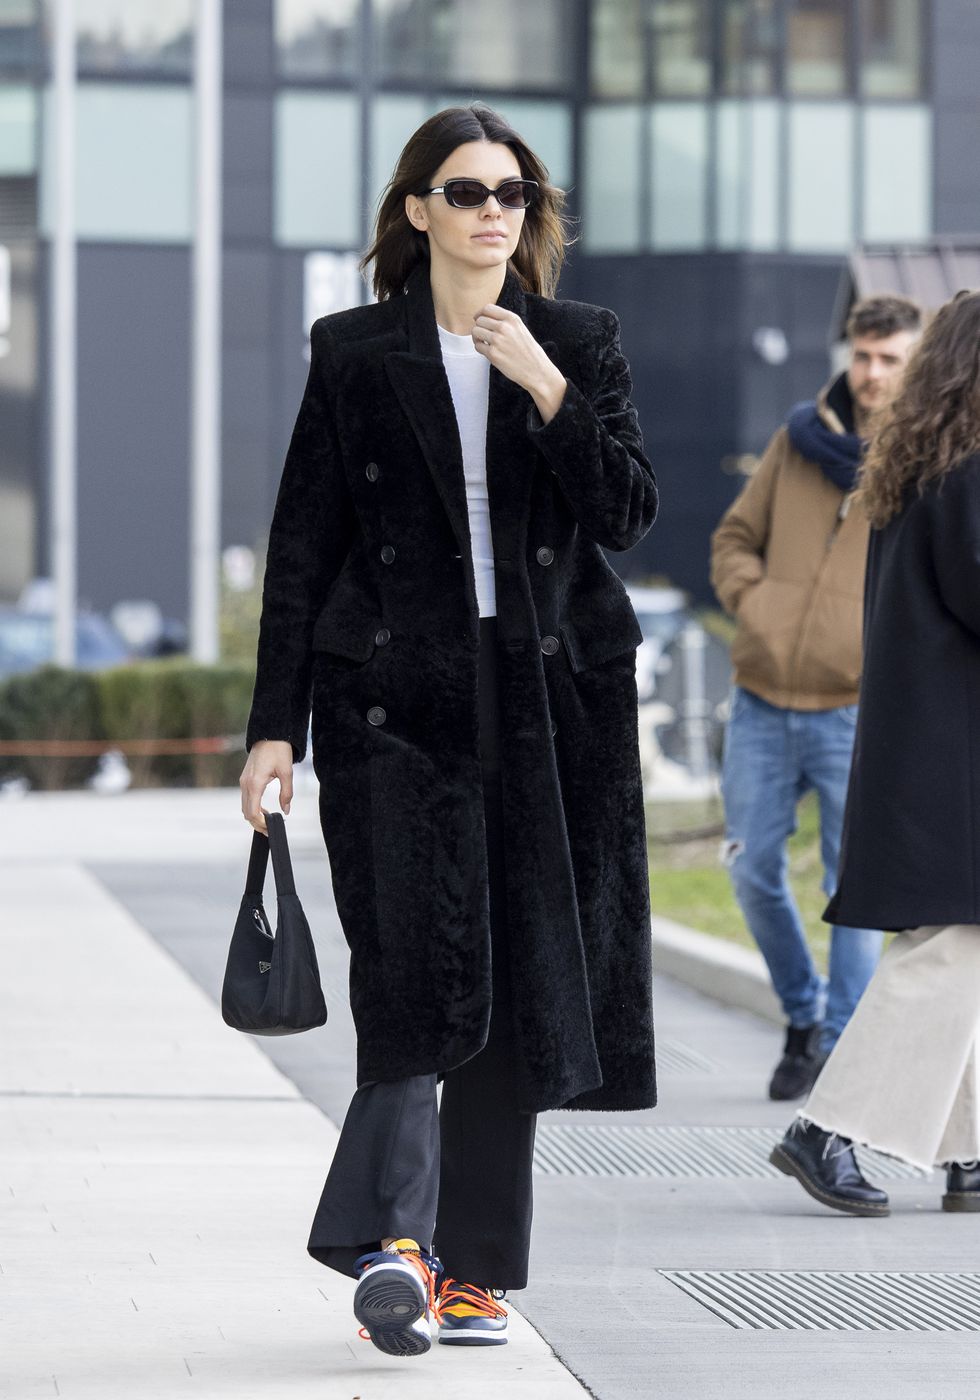 milan, italy   february 20 kendall jenner is seen during milan fashion week fallwinter 2020 2021 on february 20, 2020 in milan, italy photo by arnold jerockigetty images